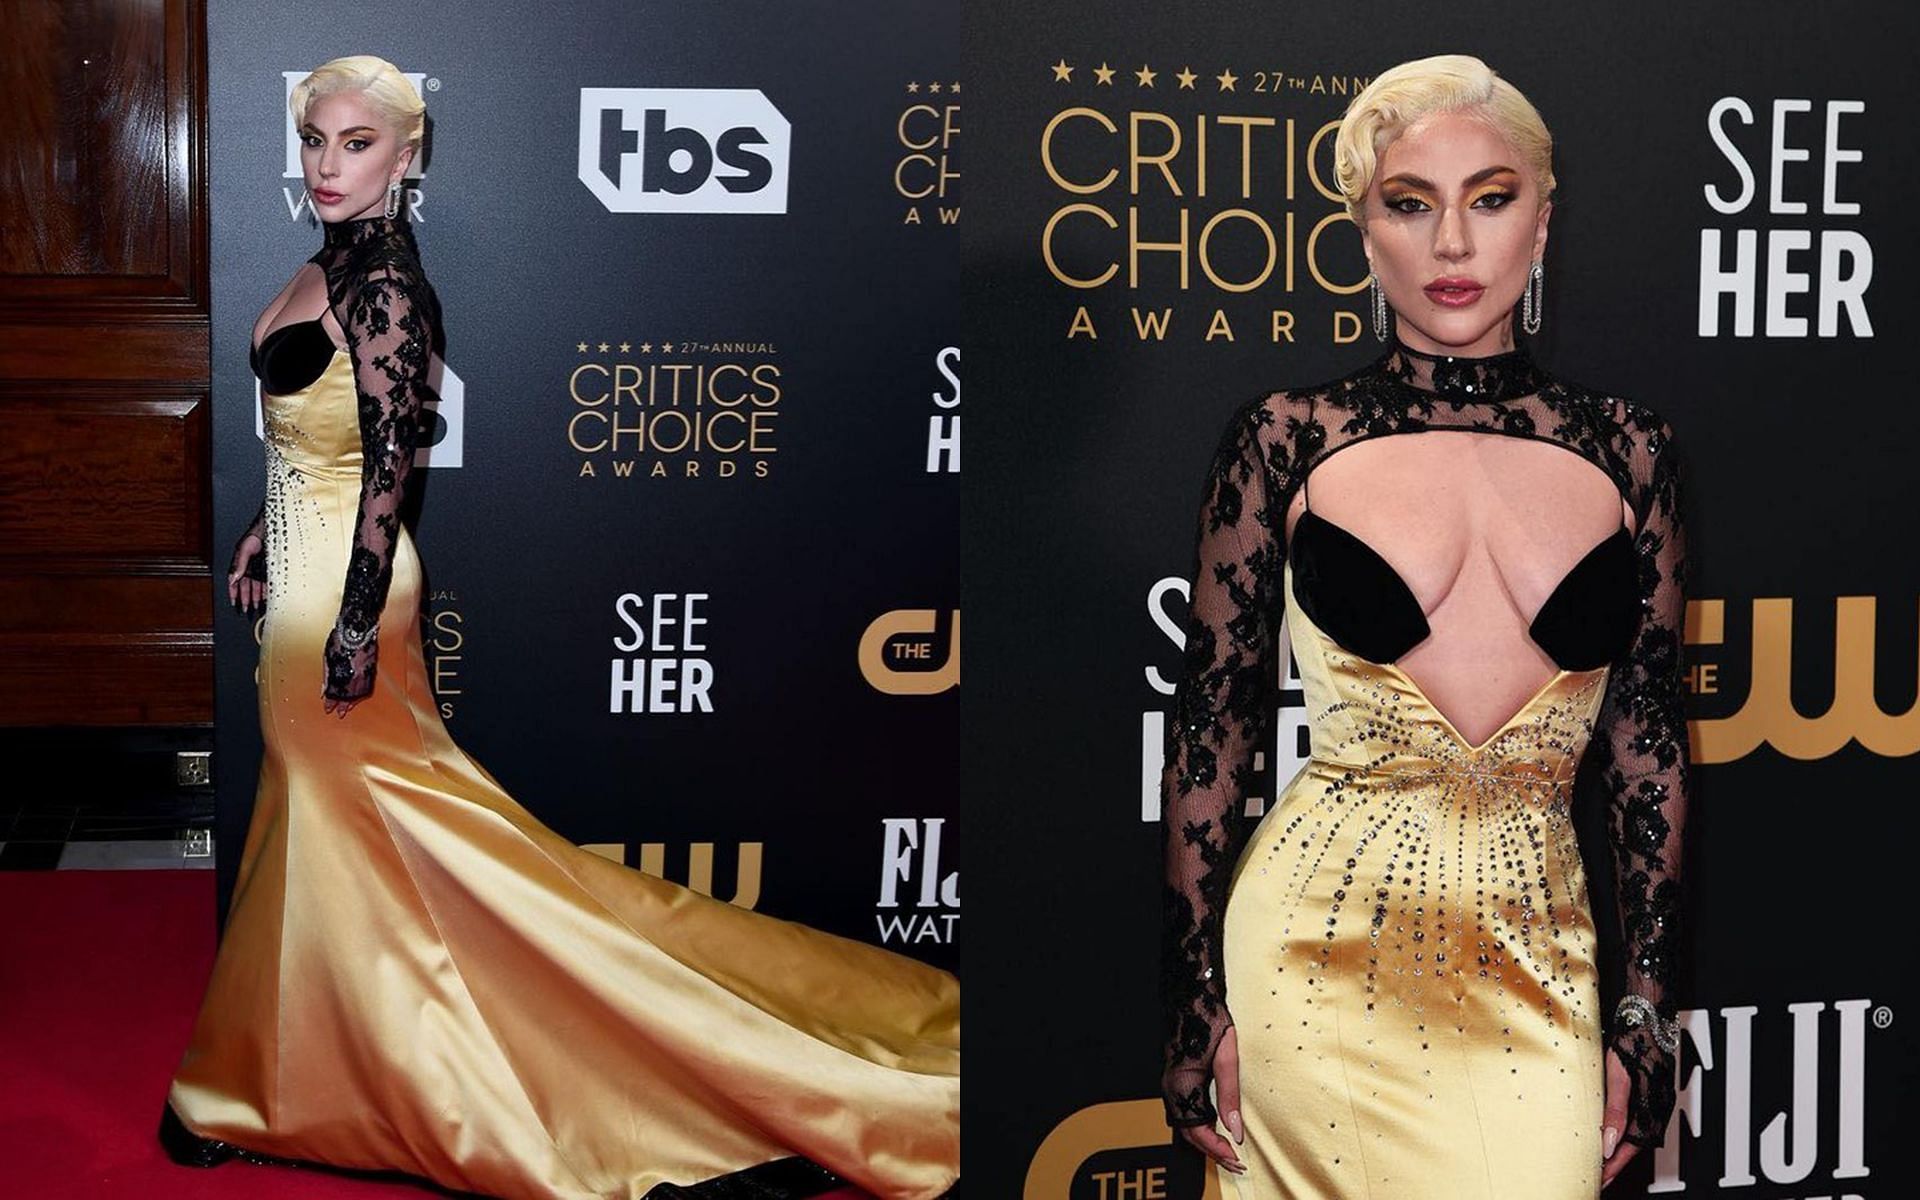 Lady Gaga was donning a satiny golden and black dress for the awards show (Image via Instagram/LadyGaganownet)